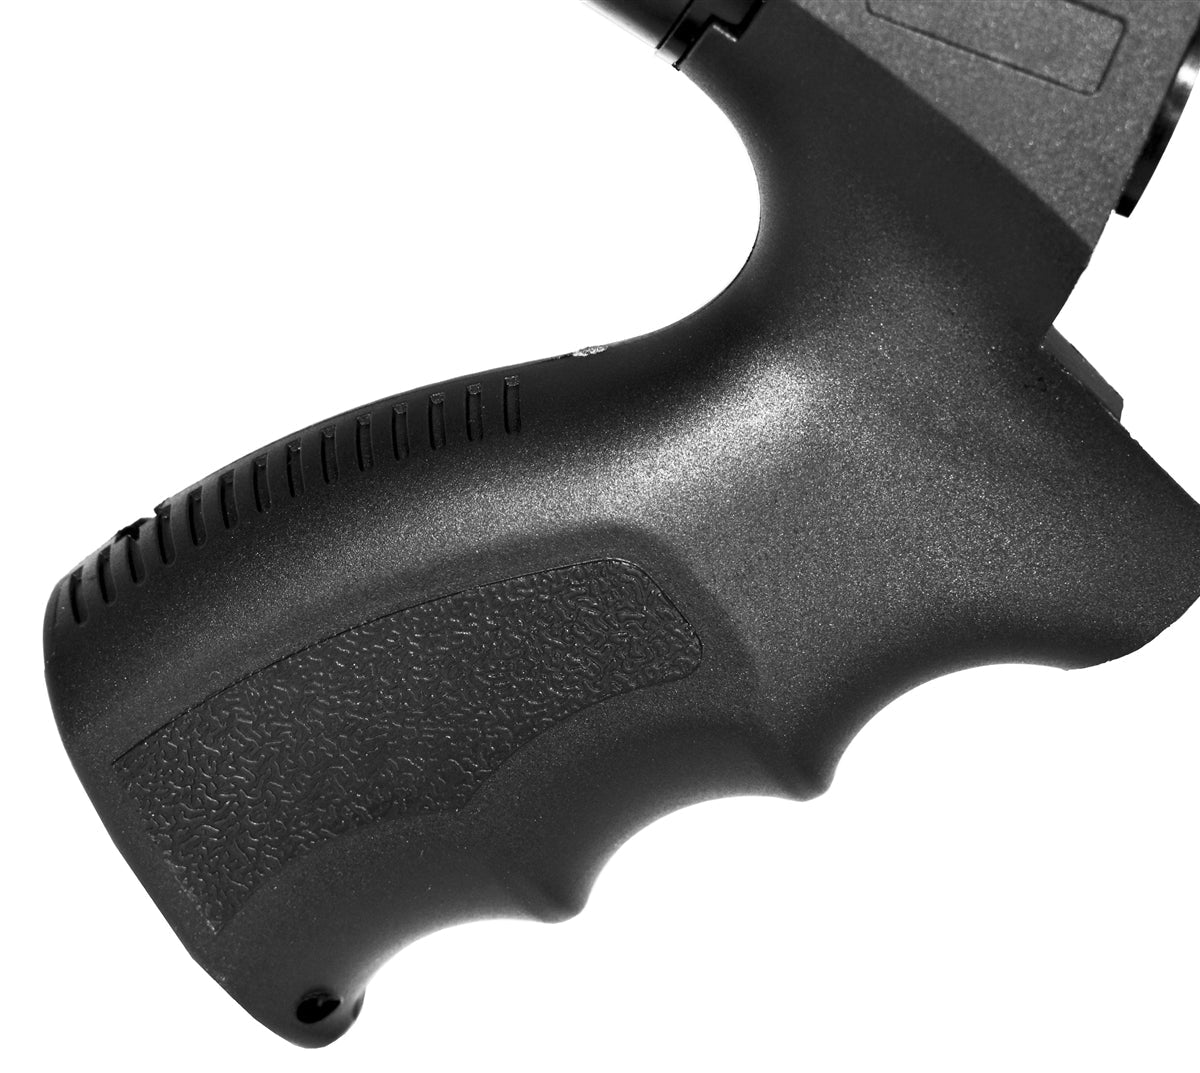 Tactical Adjustable Stock With Butt Pad Compatible With Mossberg Maverick 88 12 Gauge. - TRINITY SUPPLY INC